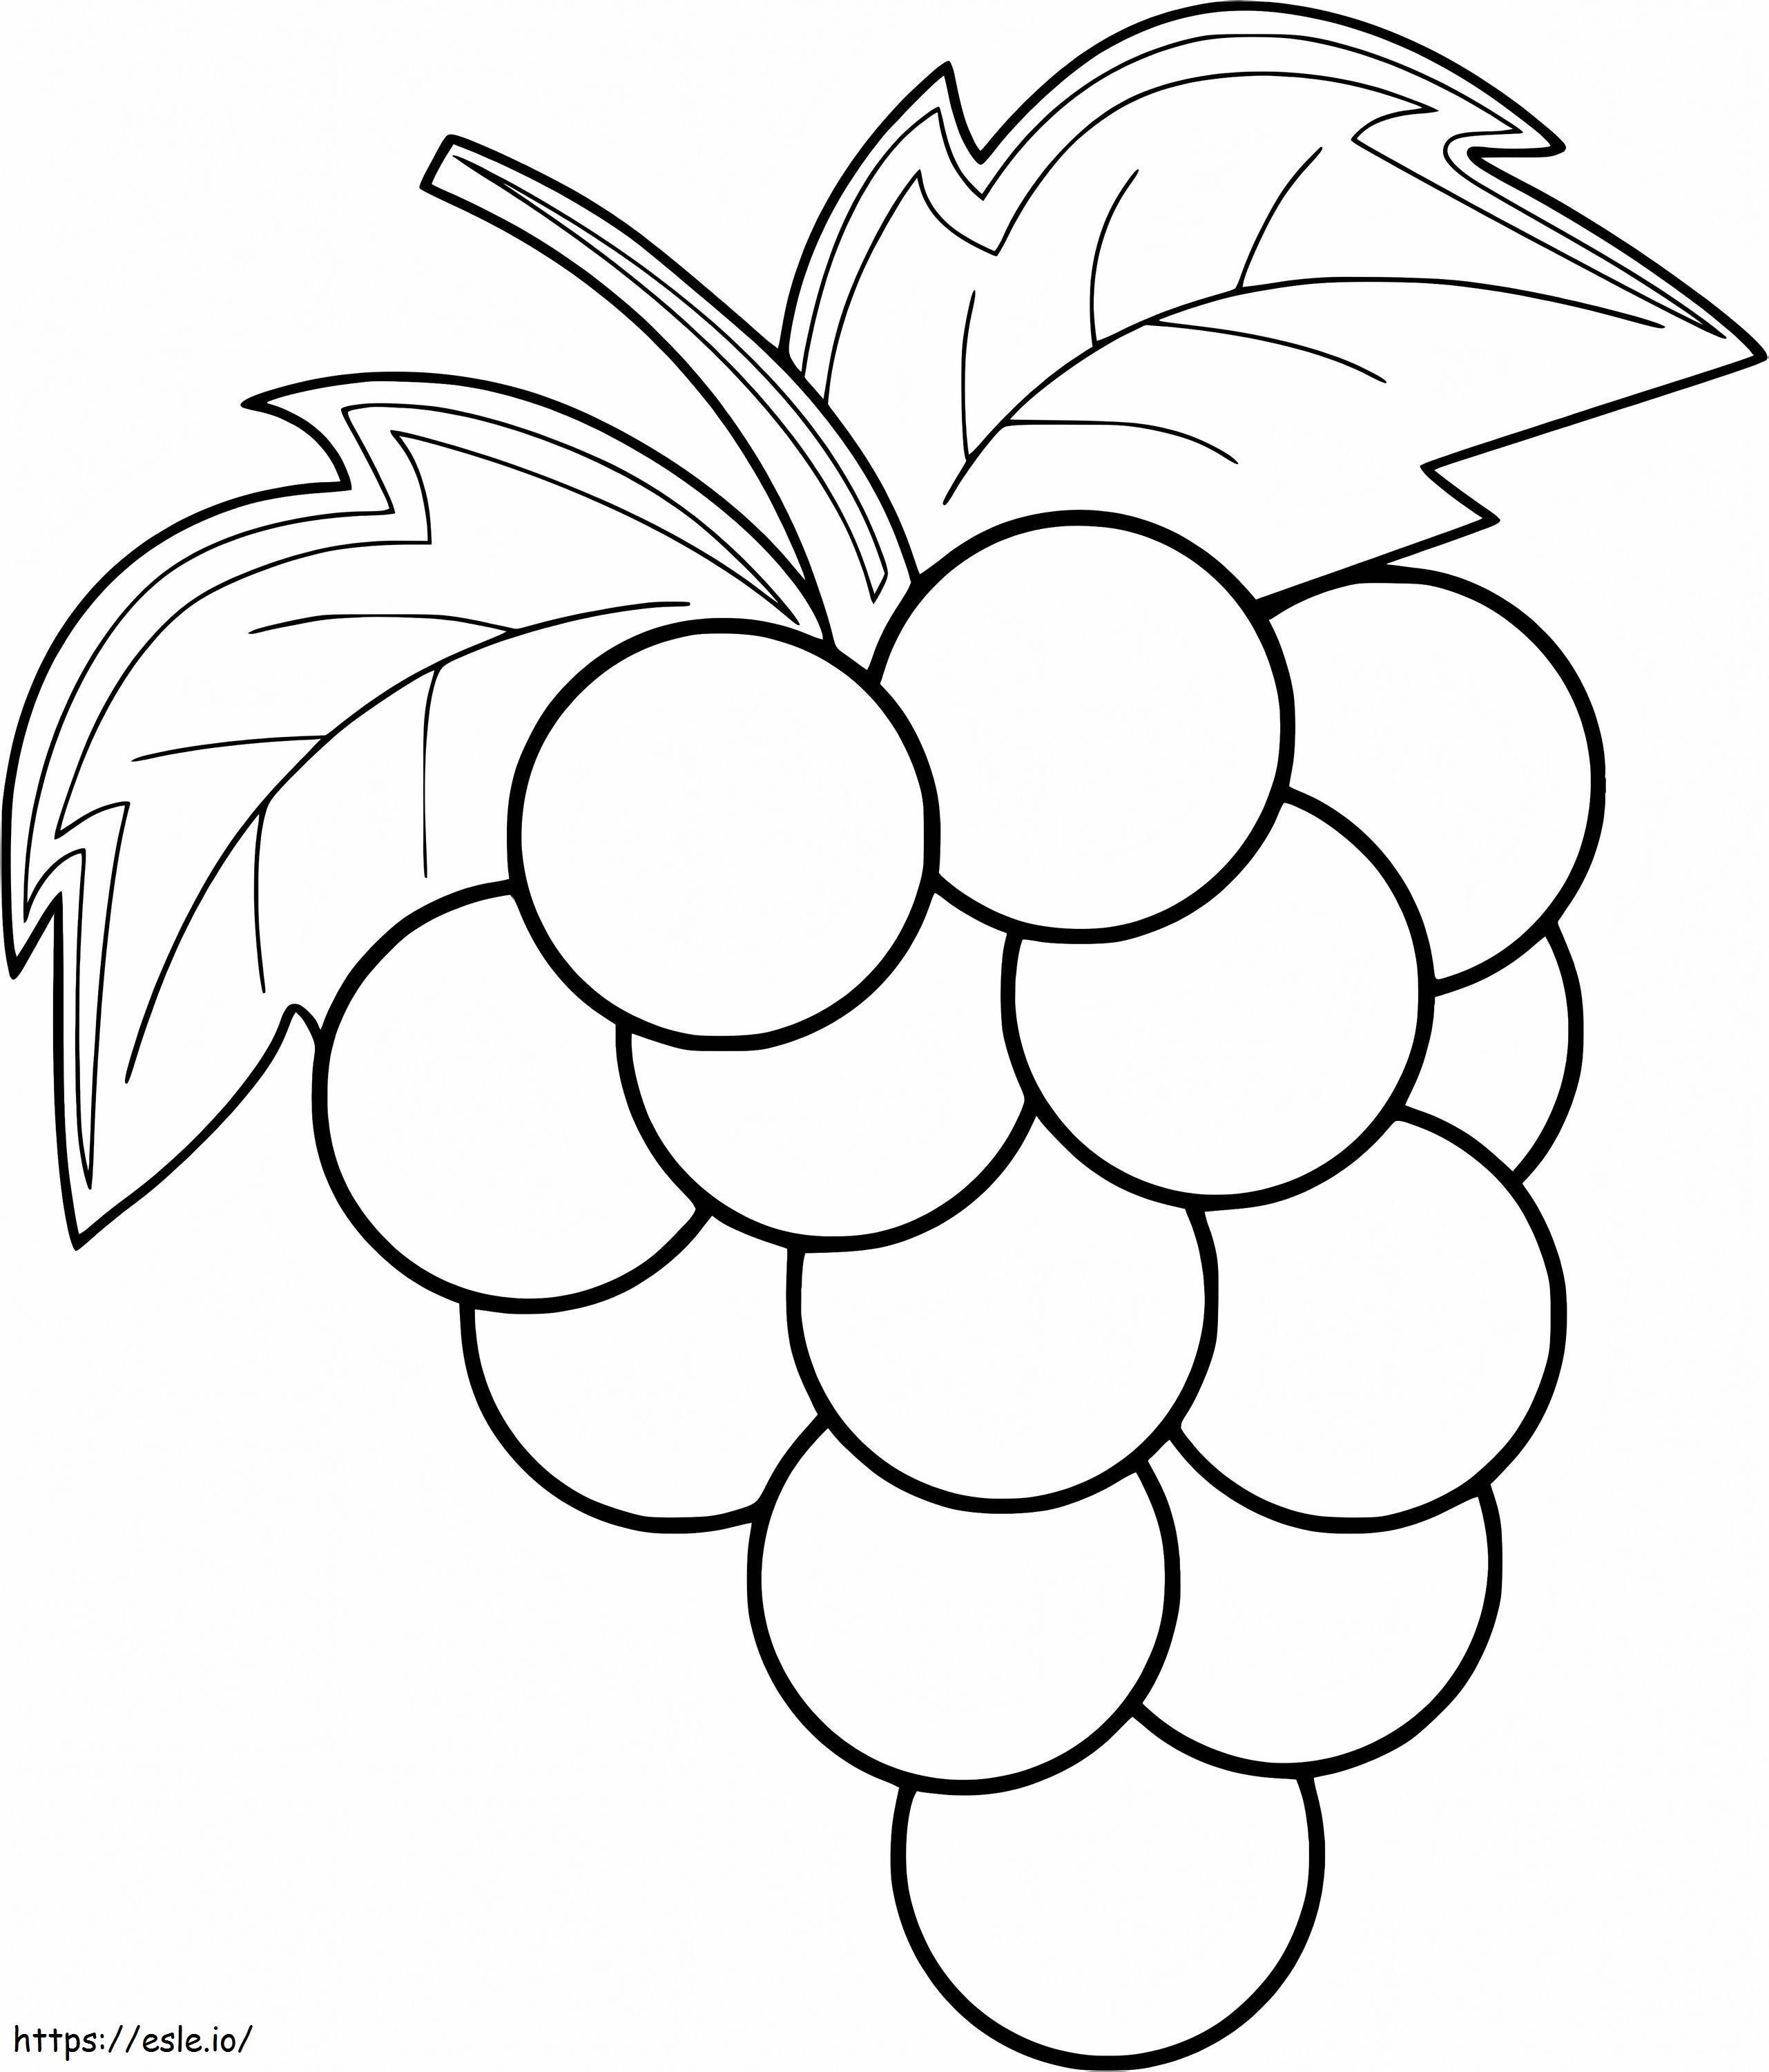 Basic Grapes coloring page